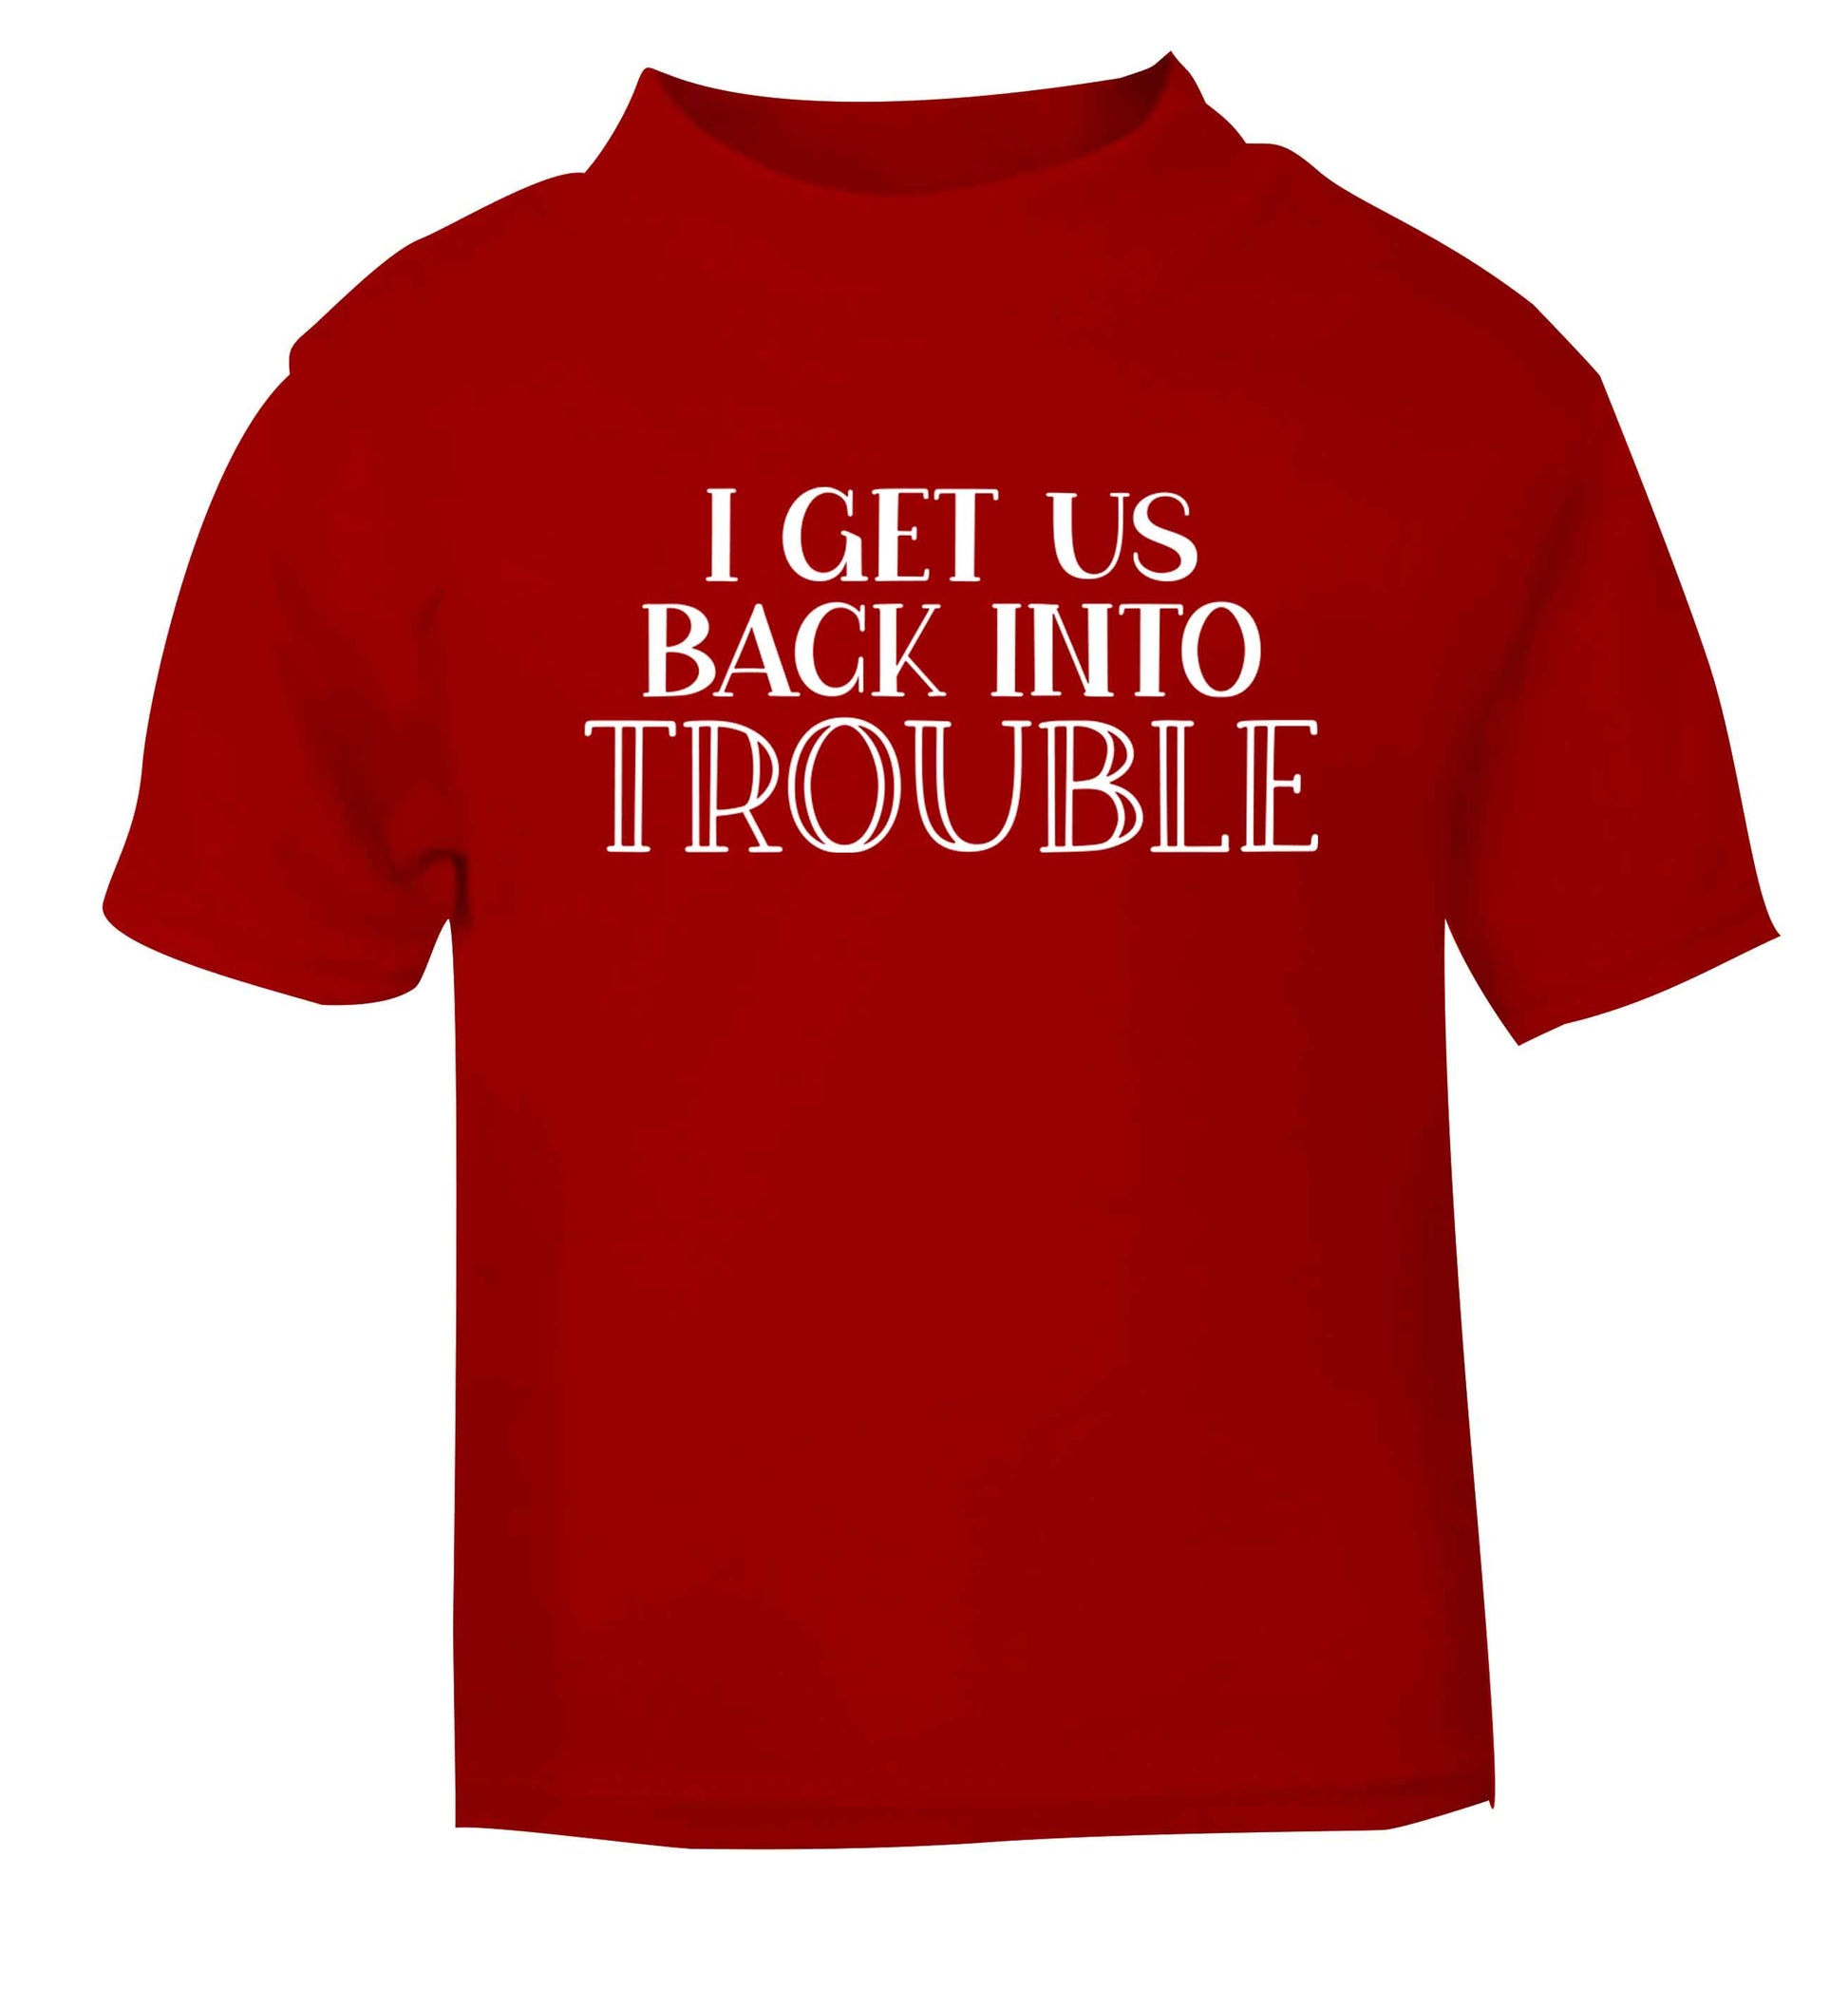 I get us back into trouble red baby toddler Tshirt 2 Years